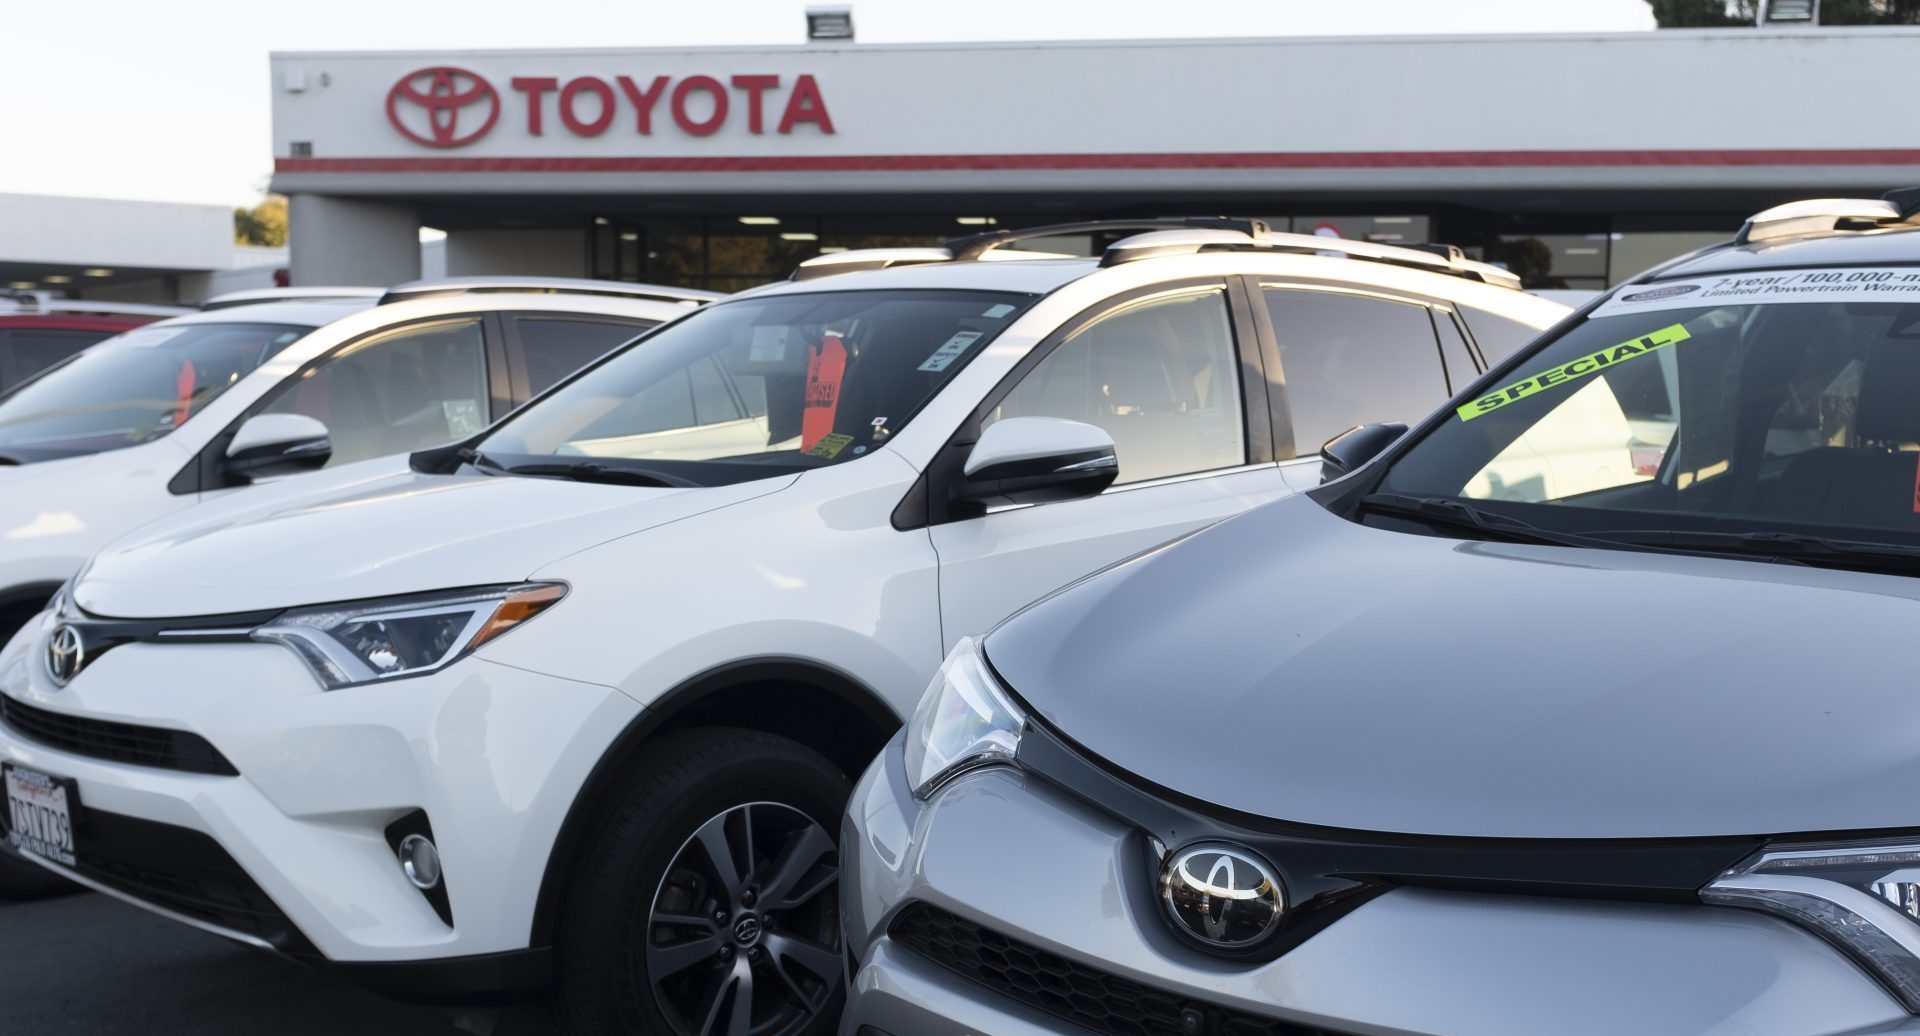 Toyota Recalls Over 1.8M Vehicles Over Potential Fire Risk Hip Hop News